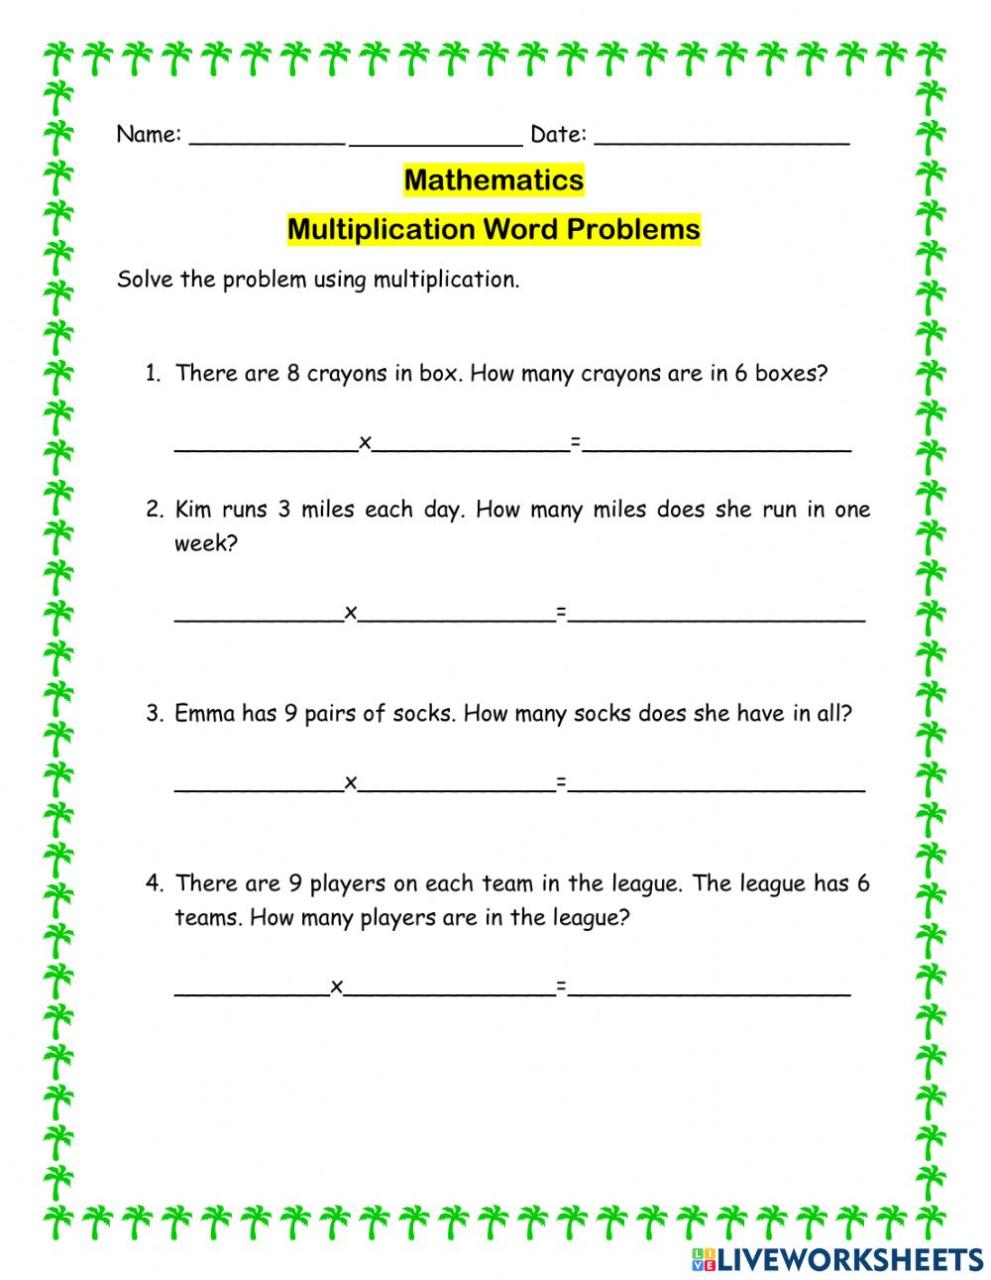 Multiplication Word Problems online exercise for 34